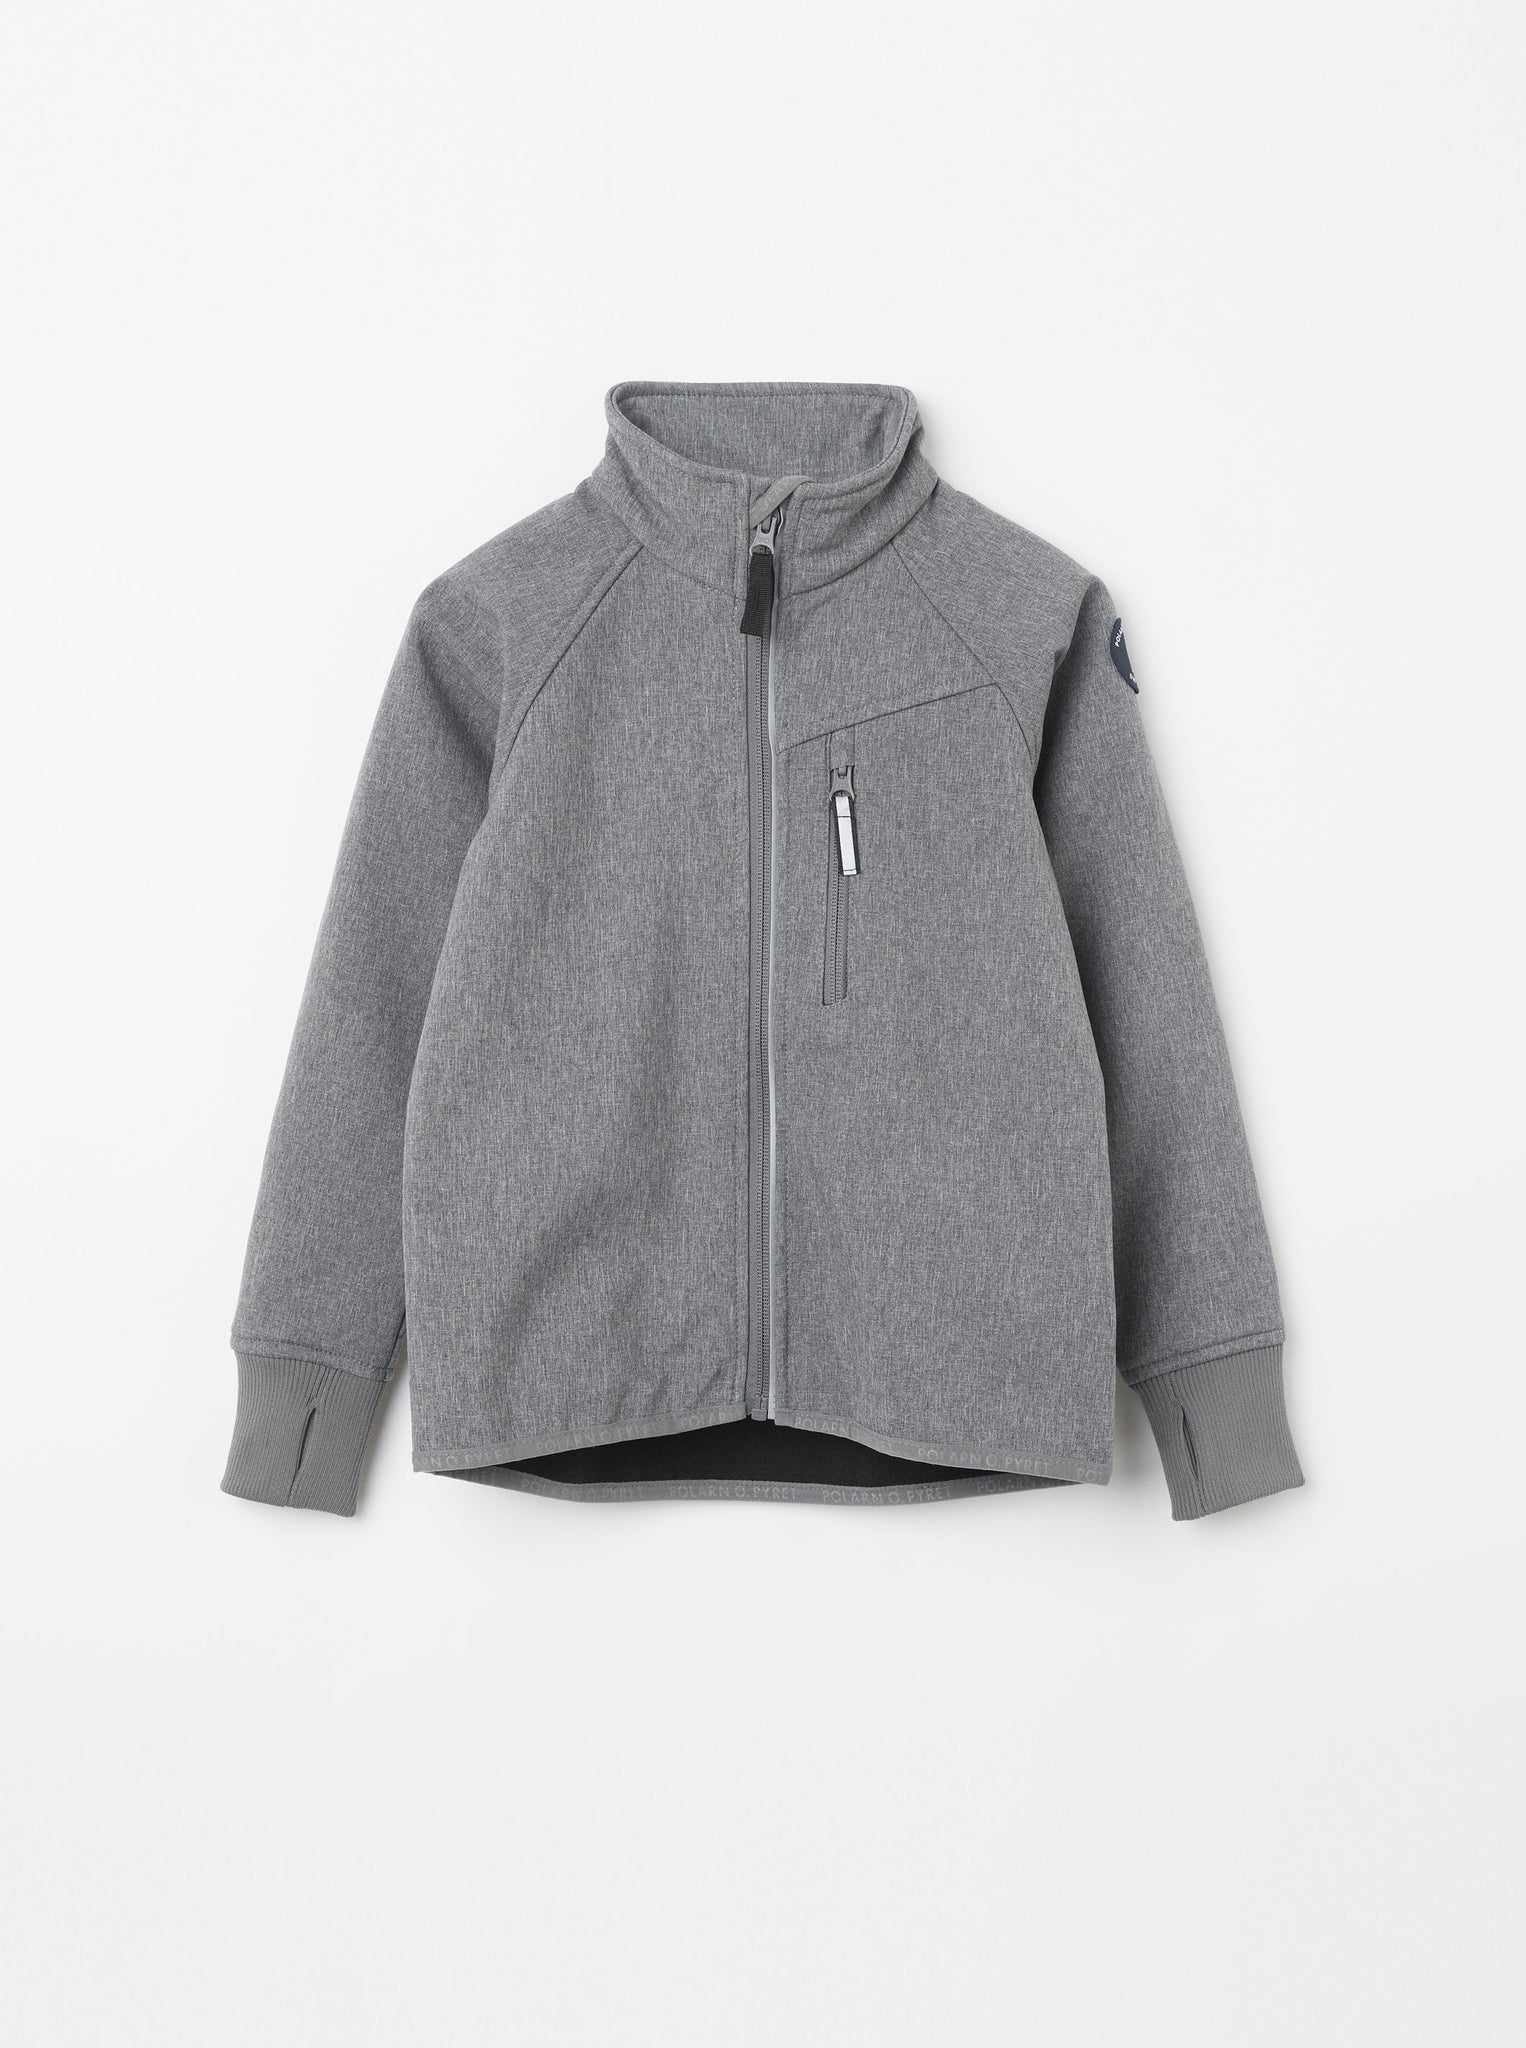 Reflective Grey Kids Shell Jacket from the Polarn O. Pyret kidswear collection. Ethically produced kids outerwear.